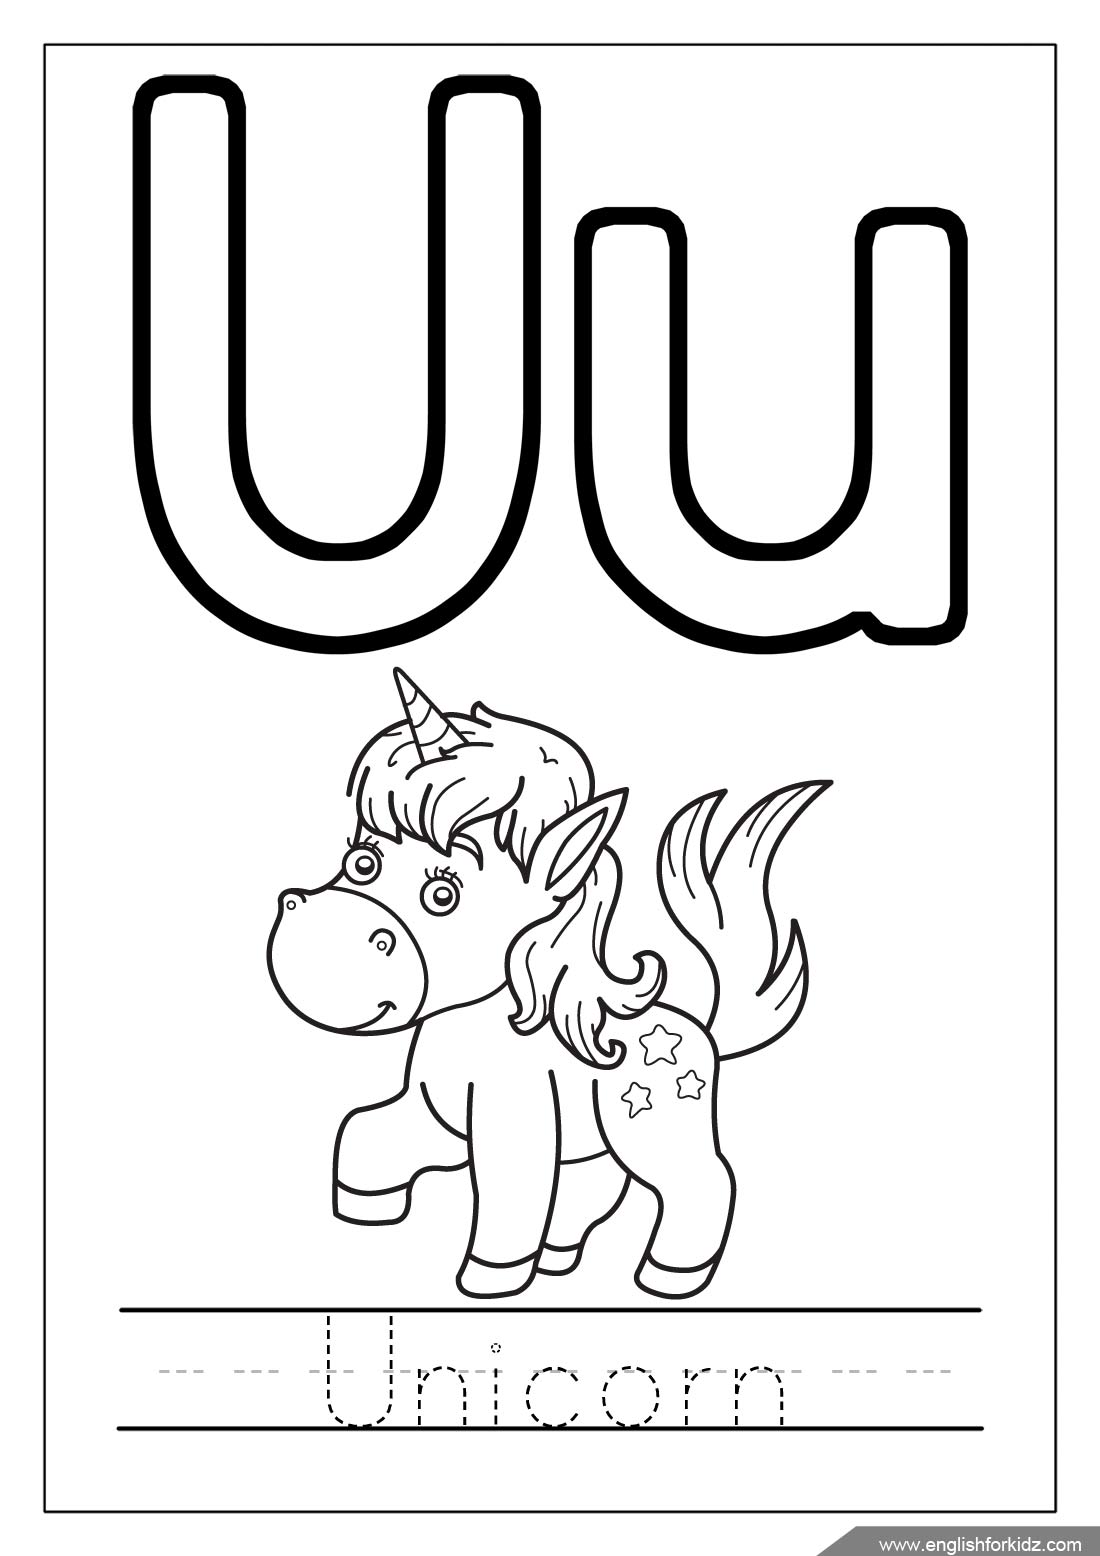 Download English for Kids Step by Step: Alphabet Coloring Pages (Letters U - Z)